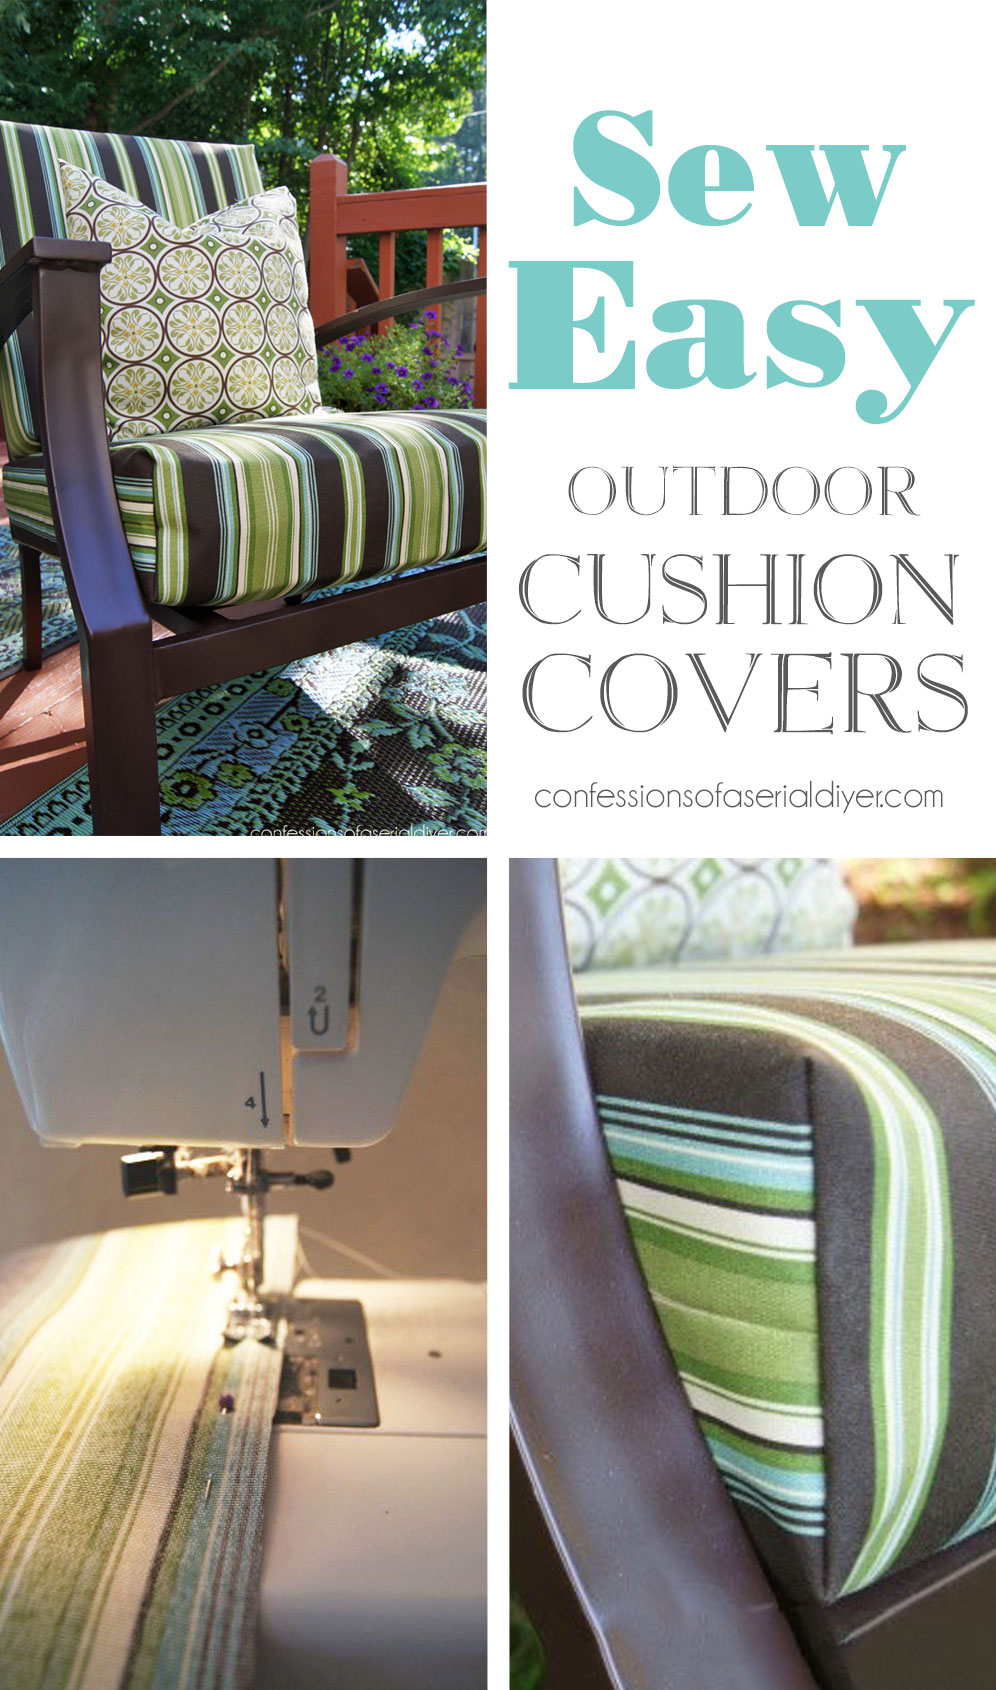 Sew Easy Outdoor Cushion Covers Confessions Of A Serial Do It Yourselfer - How To Make Cushion Covers For Outdoor Furniture